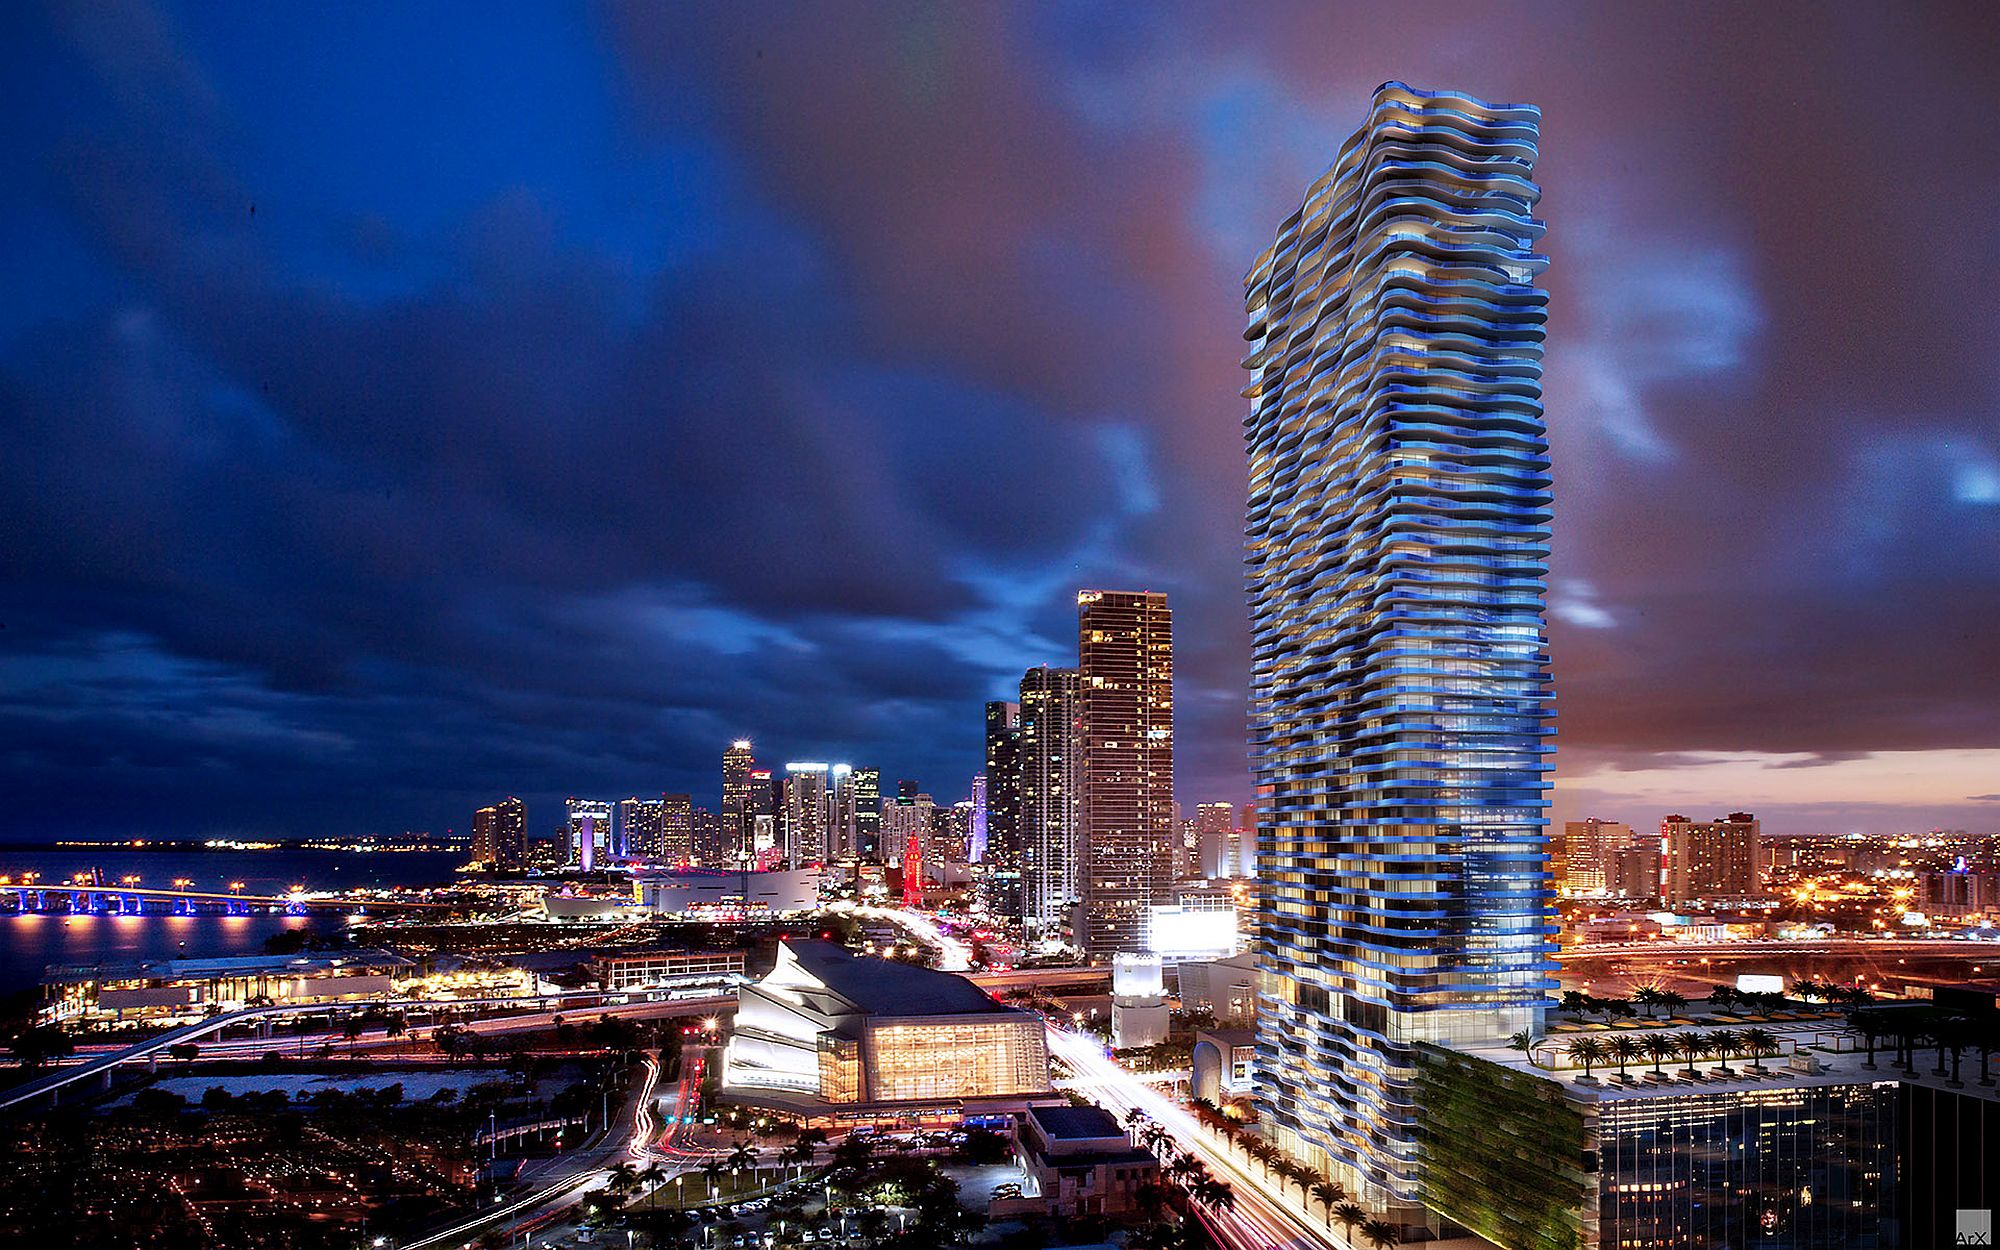 Auberge condos become a glittering new addition to iconic skyline of Miami